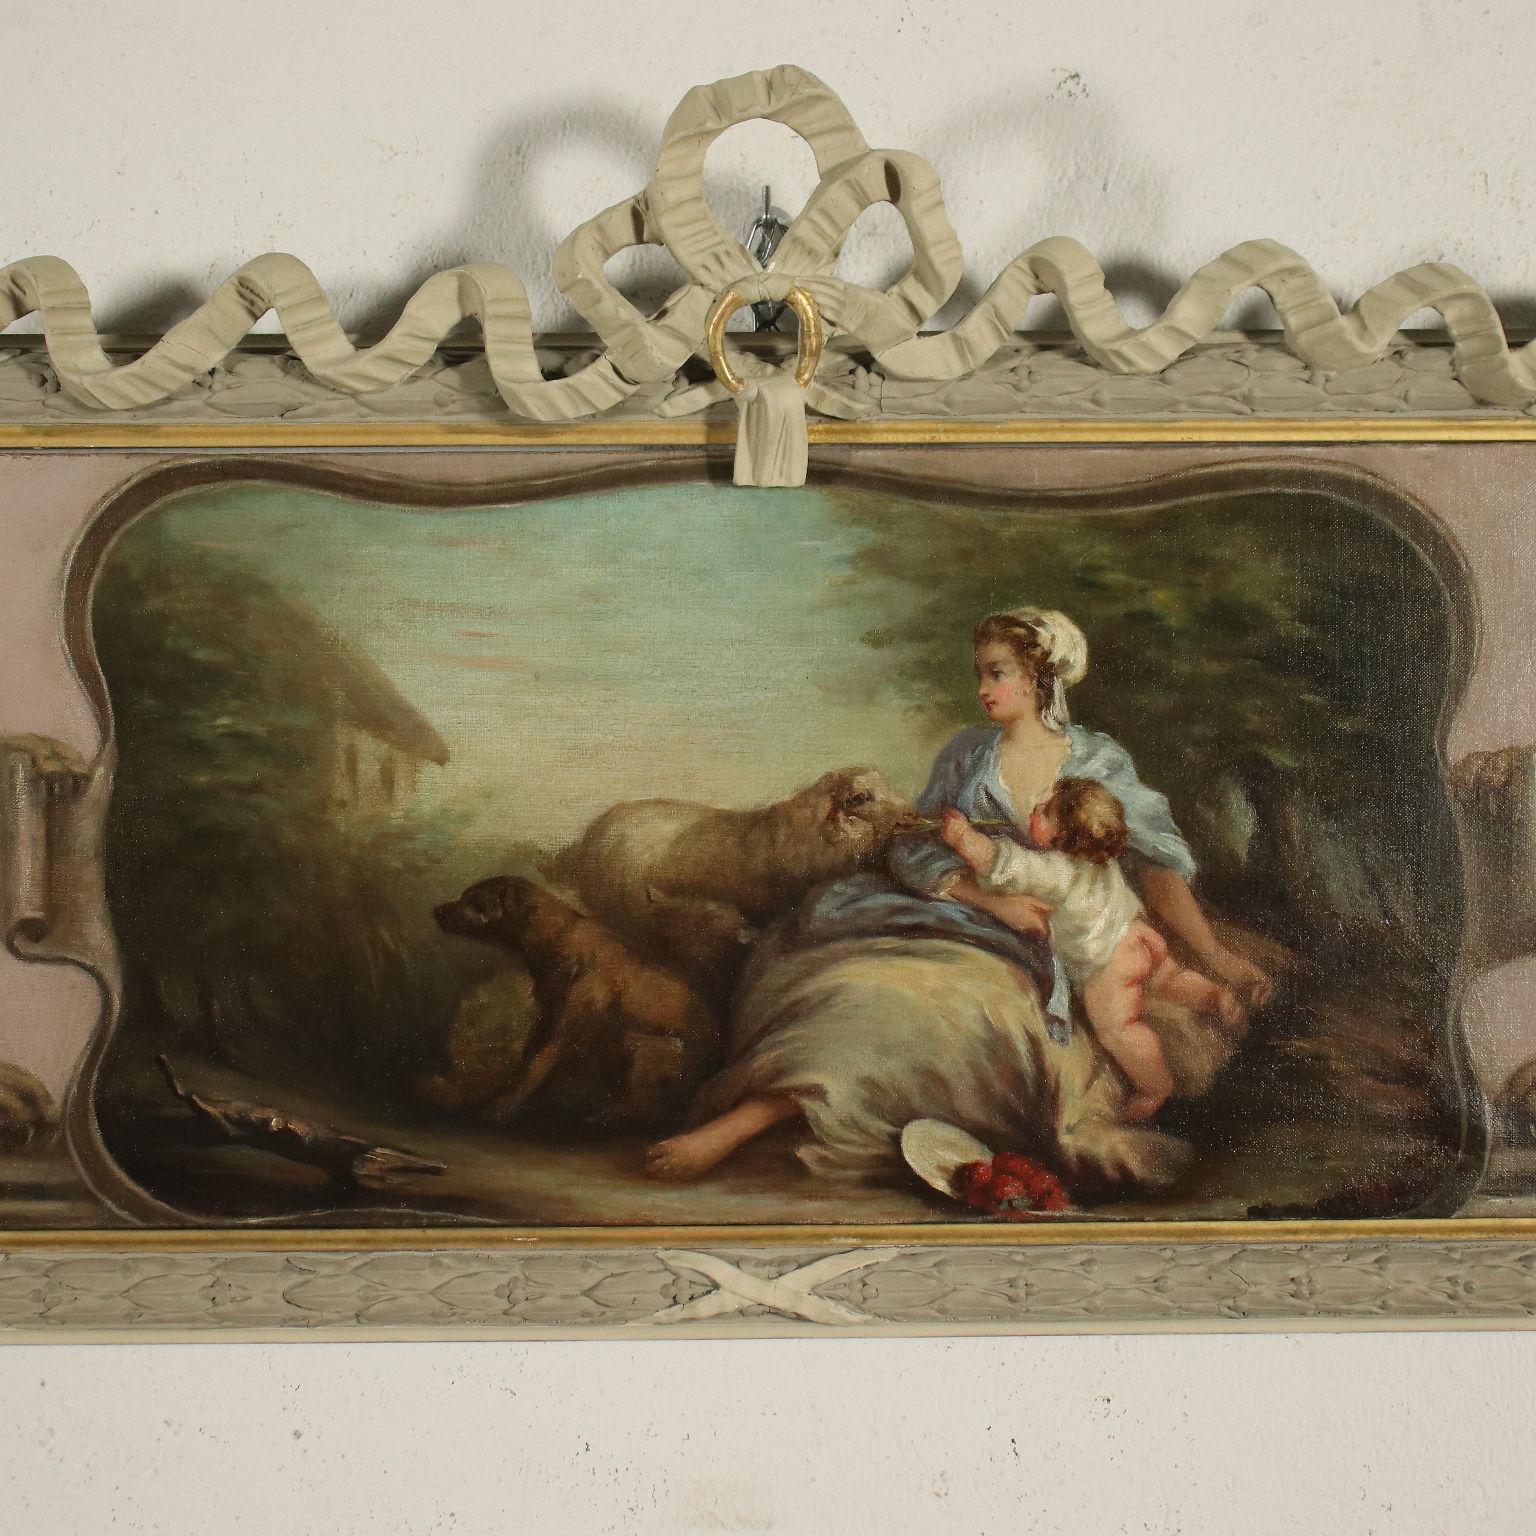 Oil on canvas.
The canvas portrays a scene inscribed inside a painted tray-shaped frame, on the sides of which there are two winged griffins; the scene depicts a female figure in a countryside exterior, in the company of a small child who is nursing